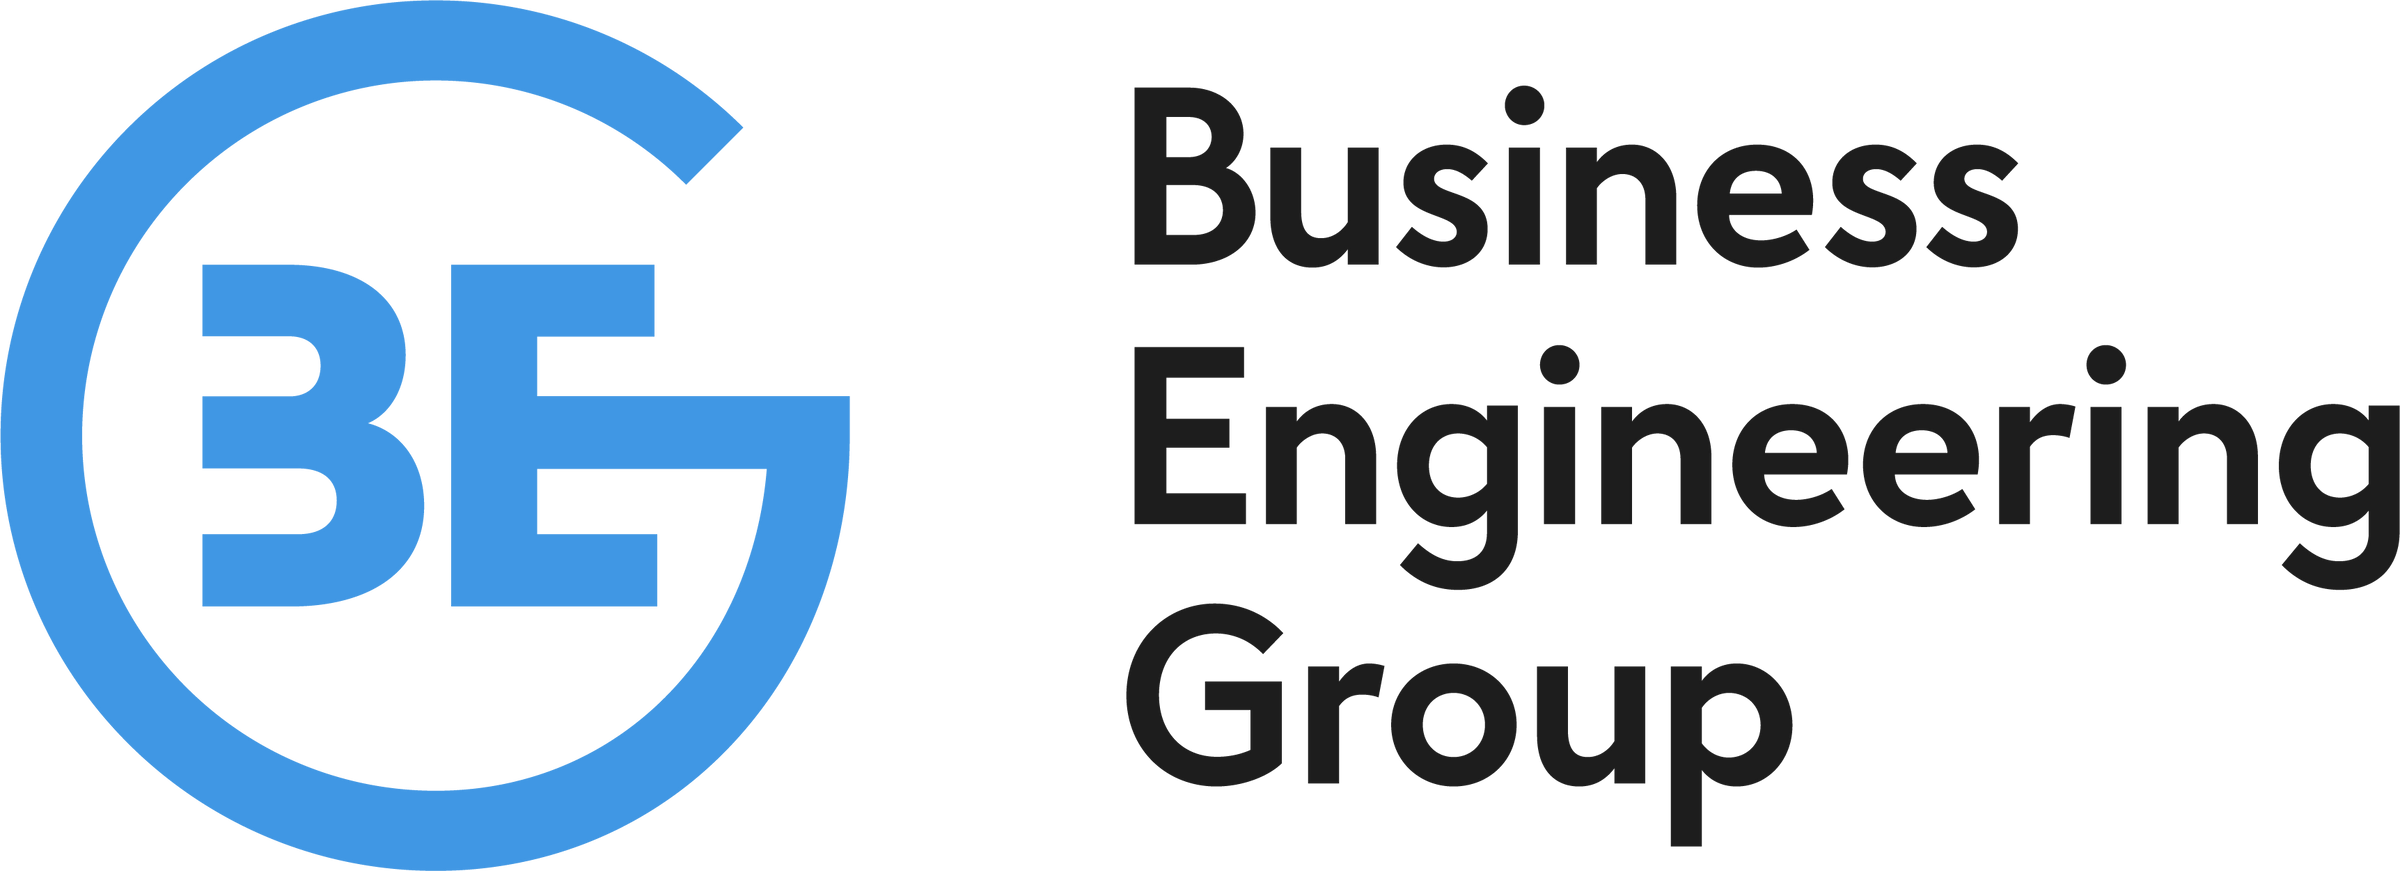 Business Engineering Group